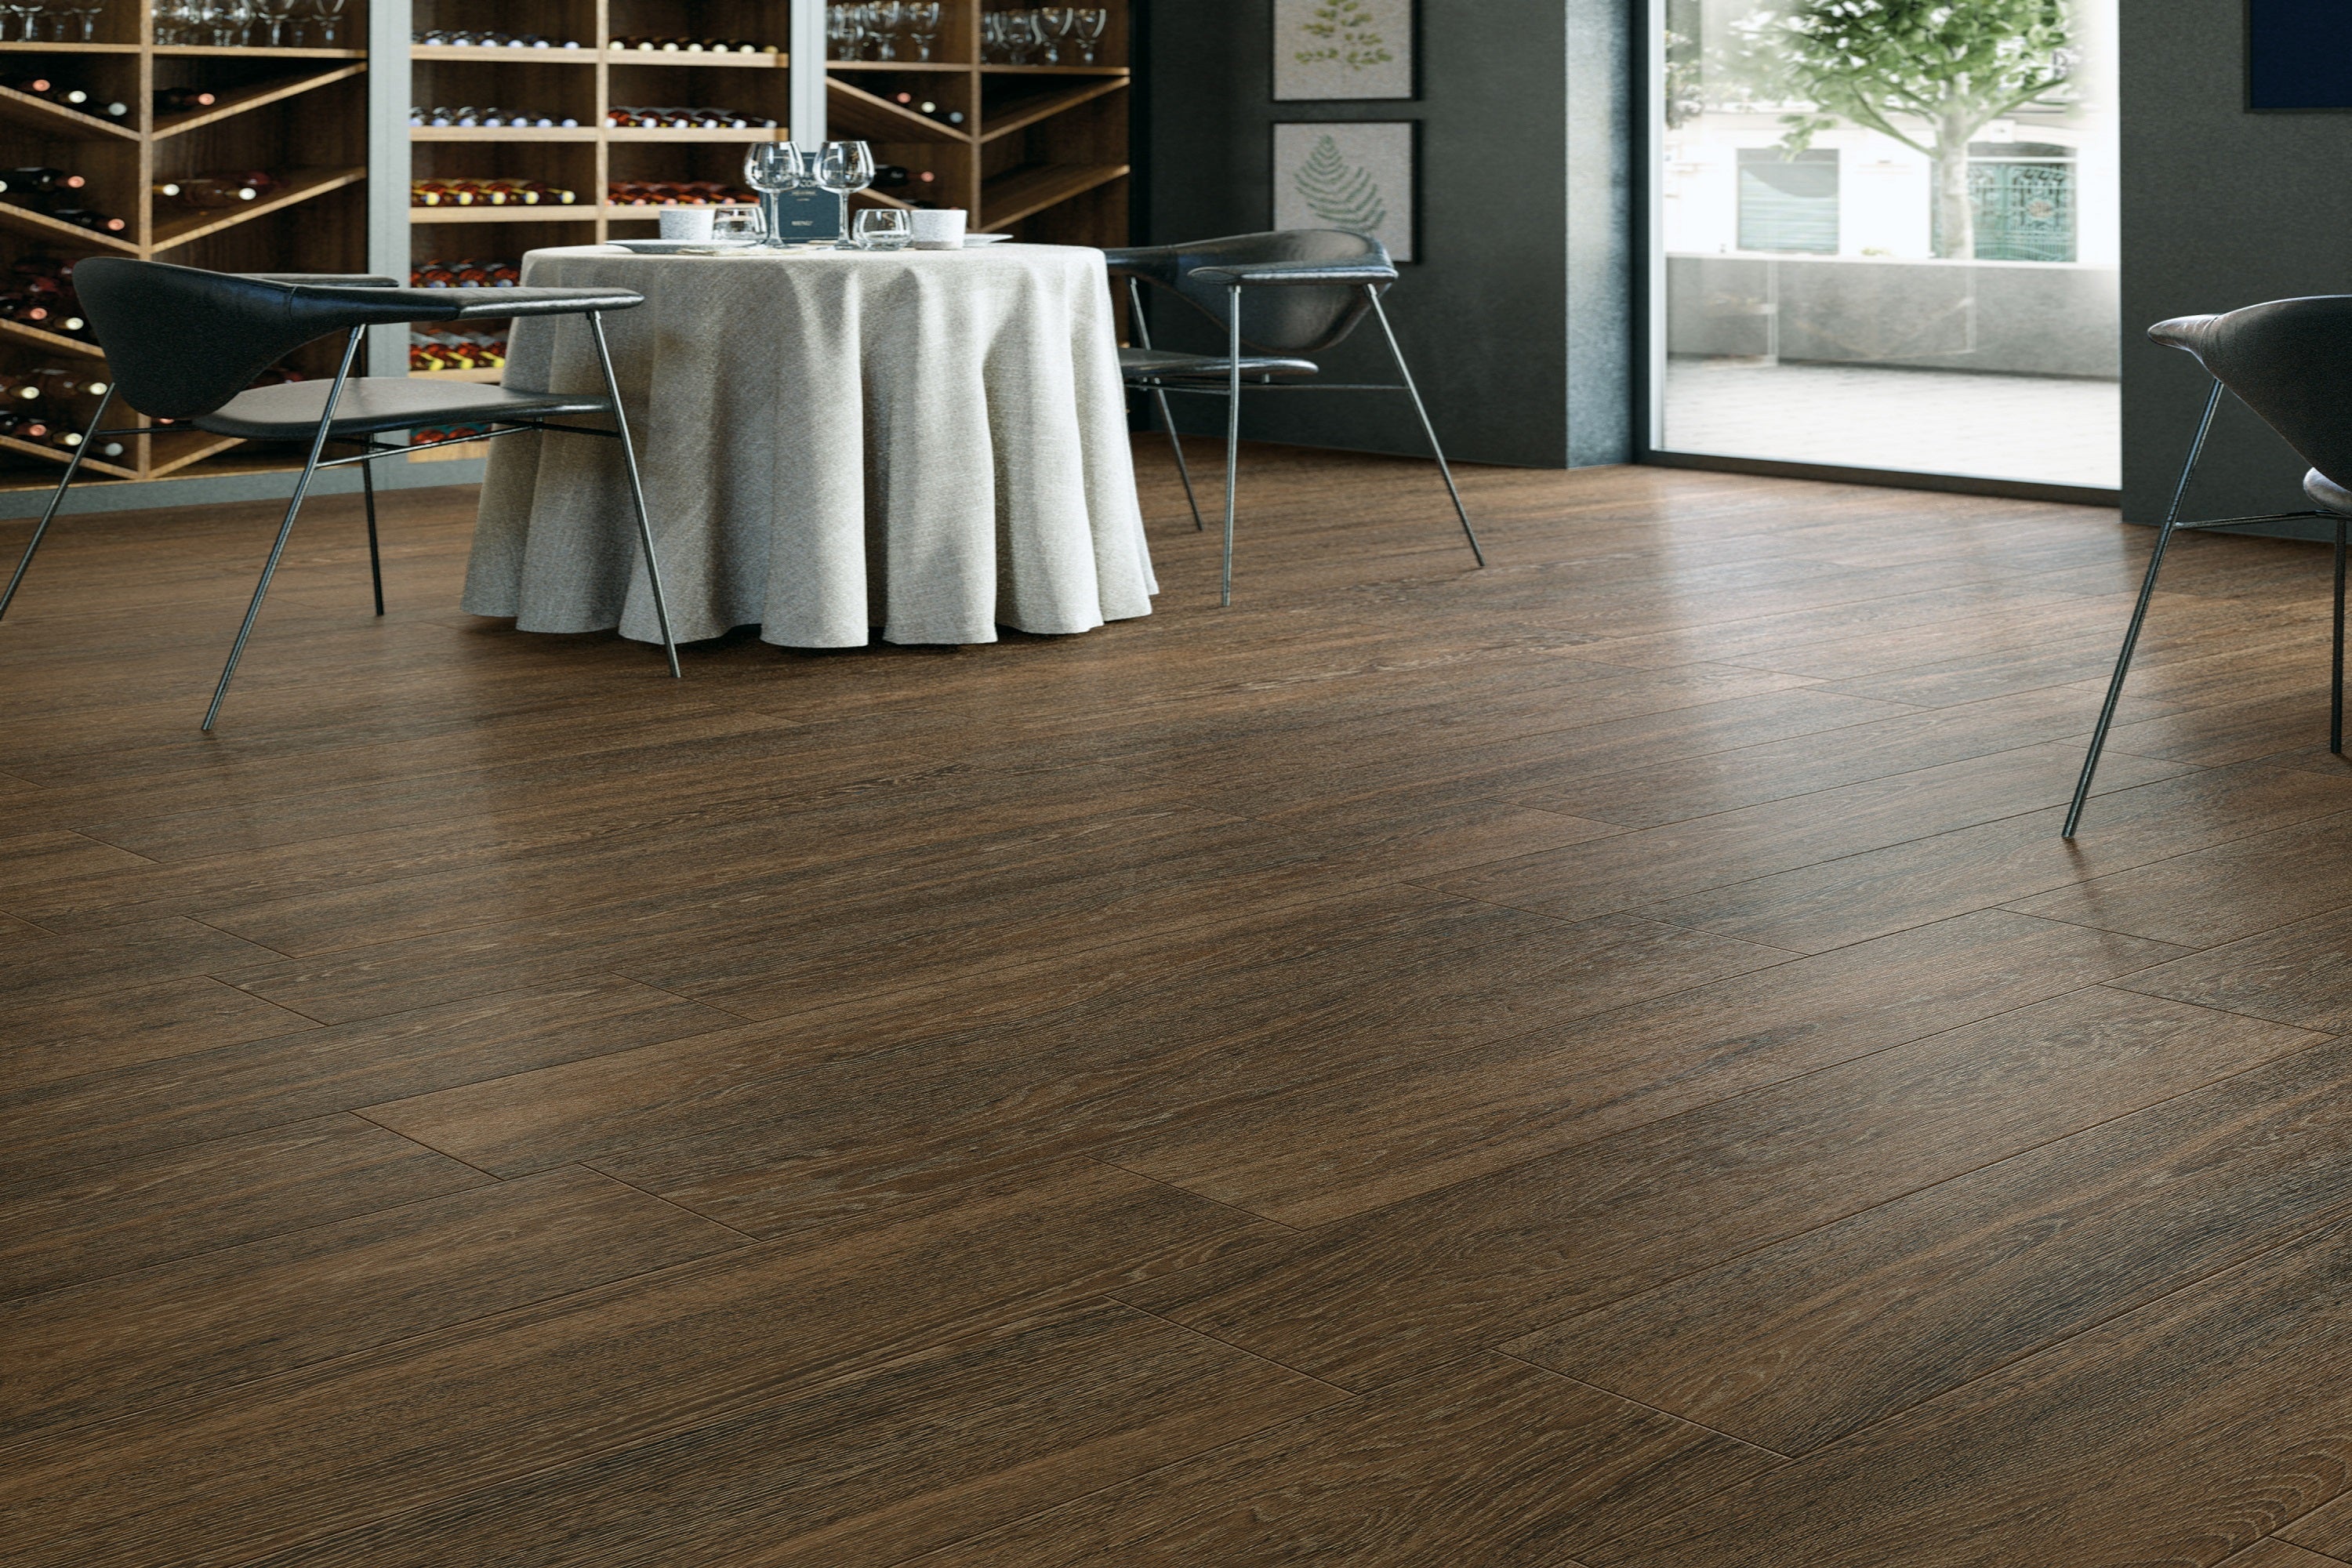 Porcelain tile flooring from Surface Group's Spirit Collection with wood-look finish in a modern dining setting